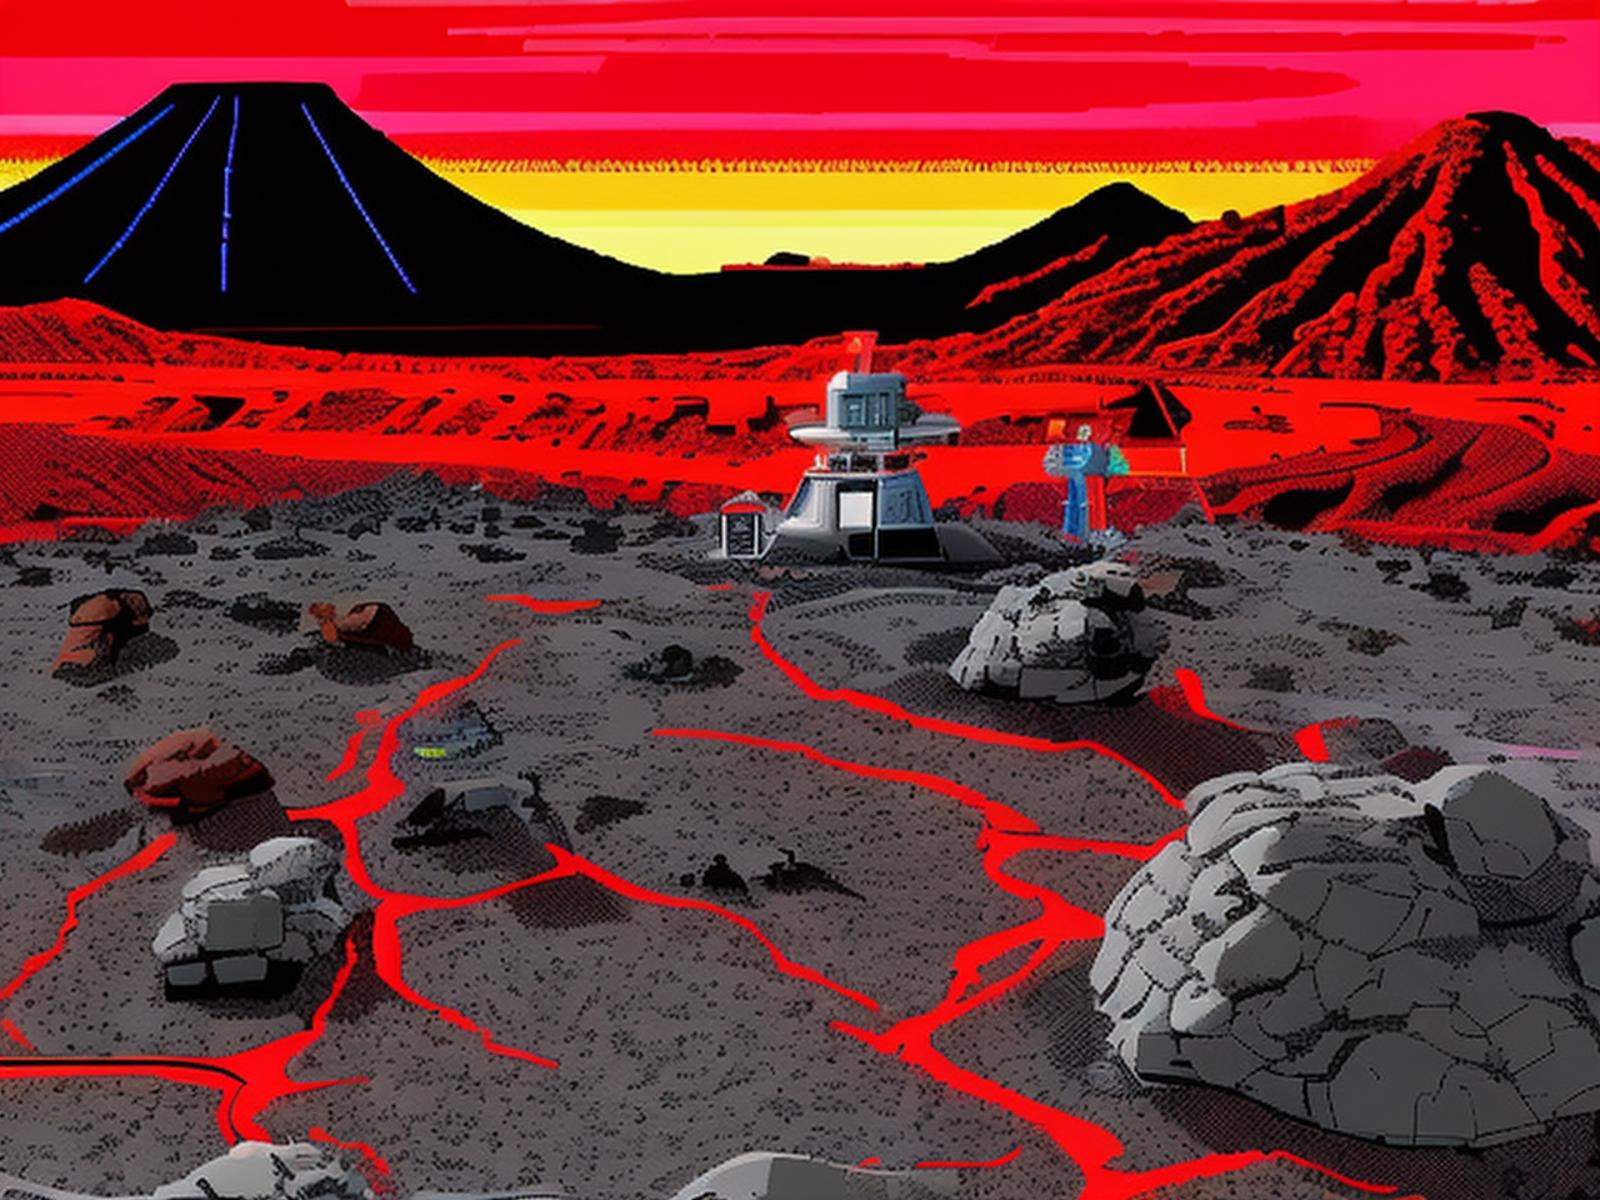 Space Quest 3 EGA Style image by WilliamTRiker